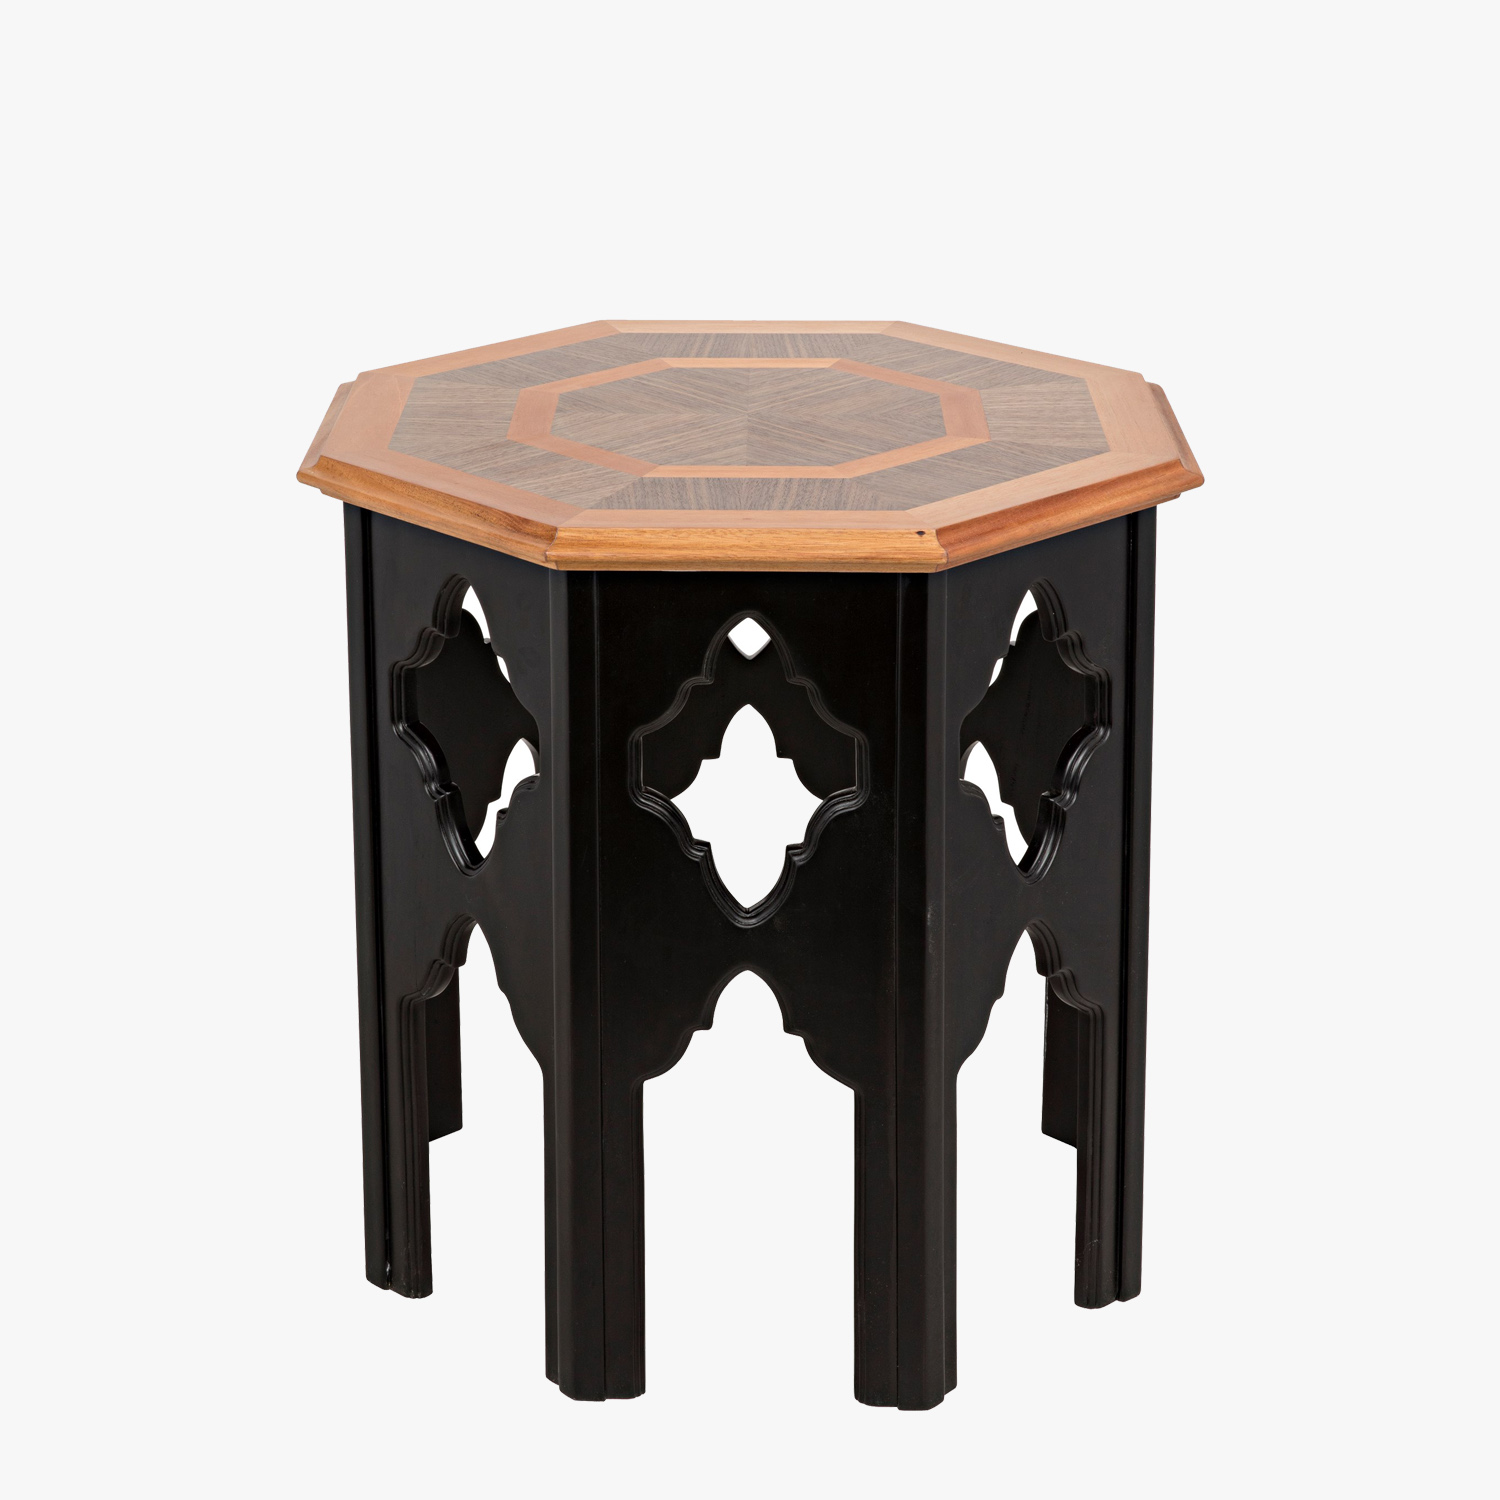 kaleb moroccan side table dear keaton accent under coffee centerpiece ideas for home cool floor lamps hampton bay patio chairs tiffany style lamp with lighted base west elm shades